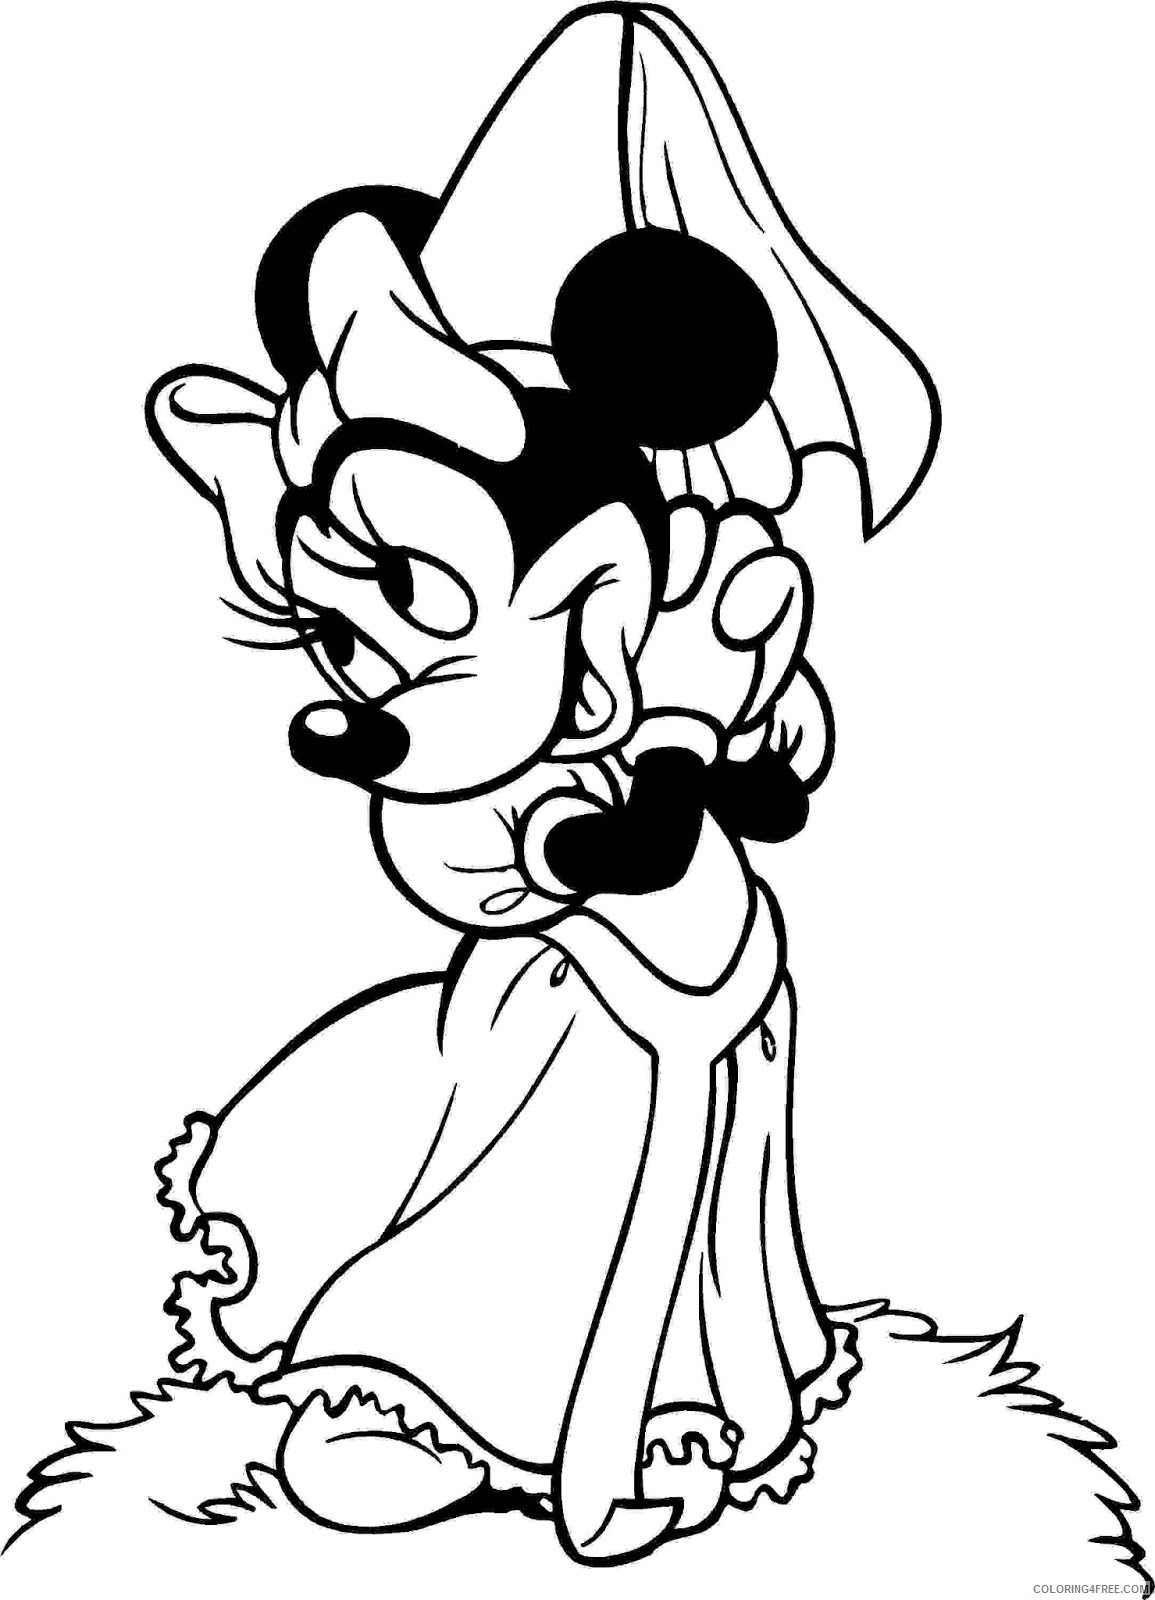 Minnie Mouse Coloring Pages Cartoons Minnie Mouse Printable 2020 4310 Coloring4free